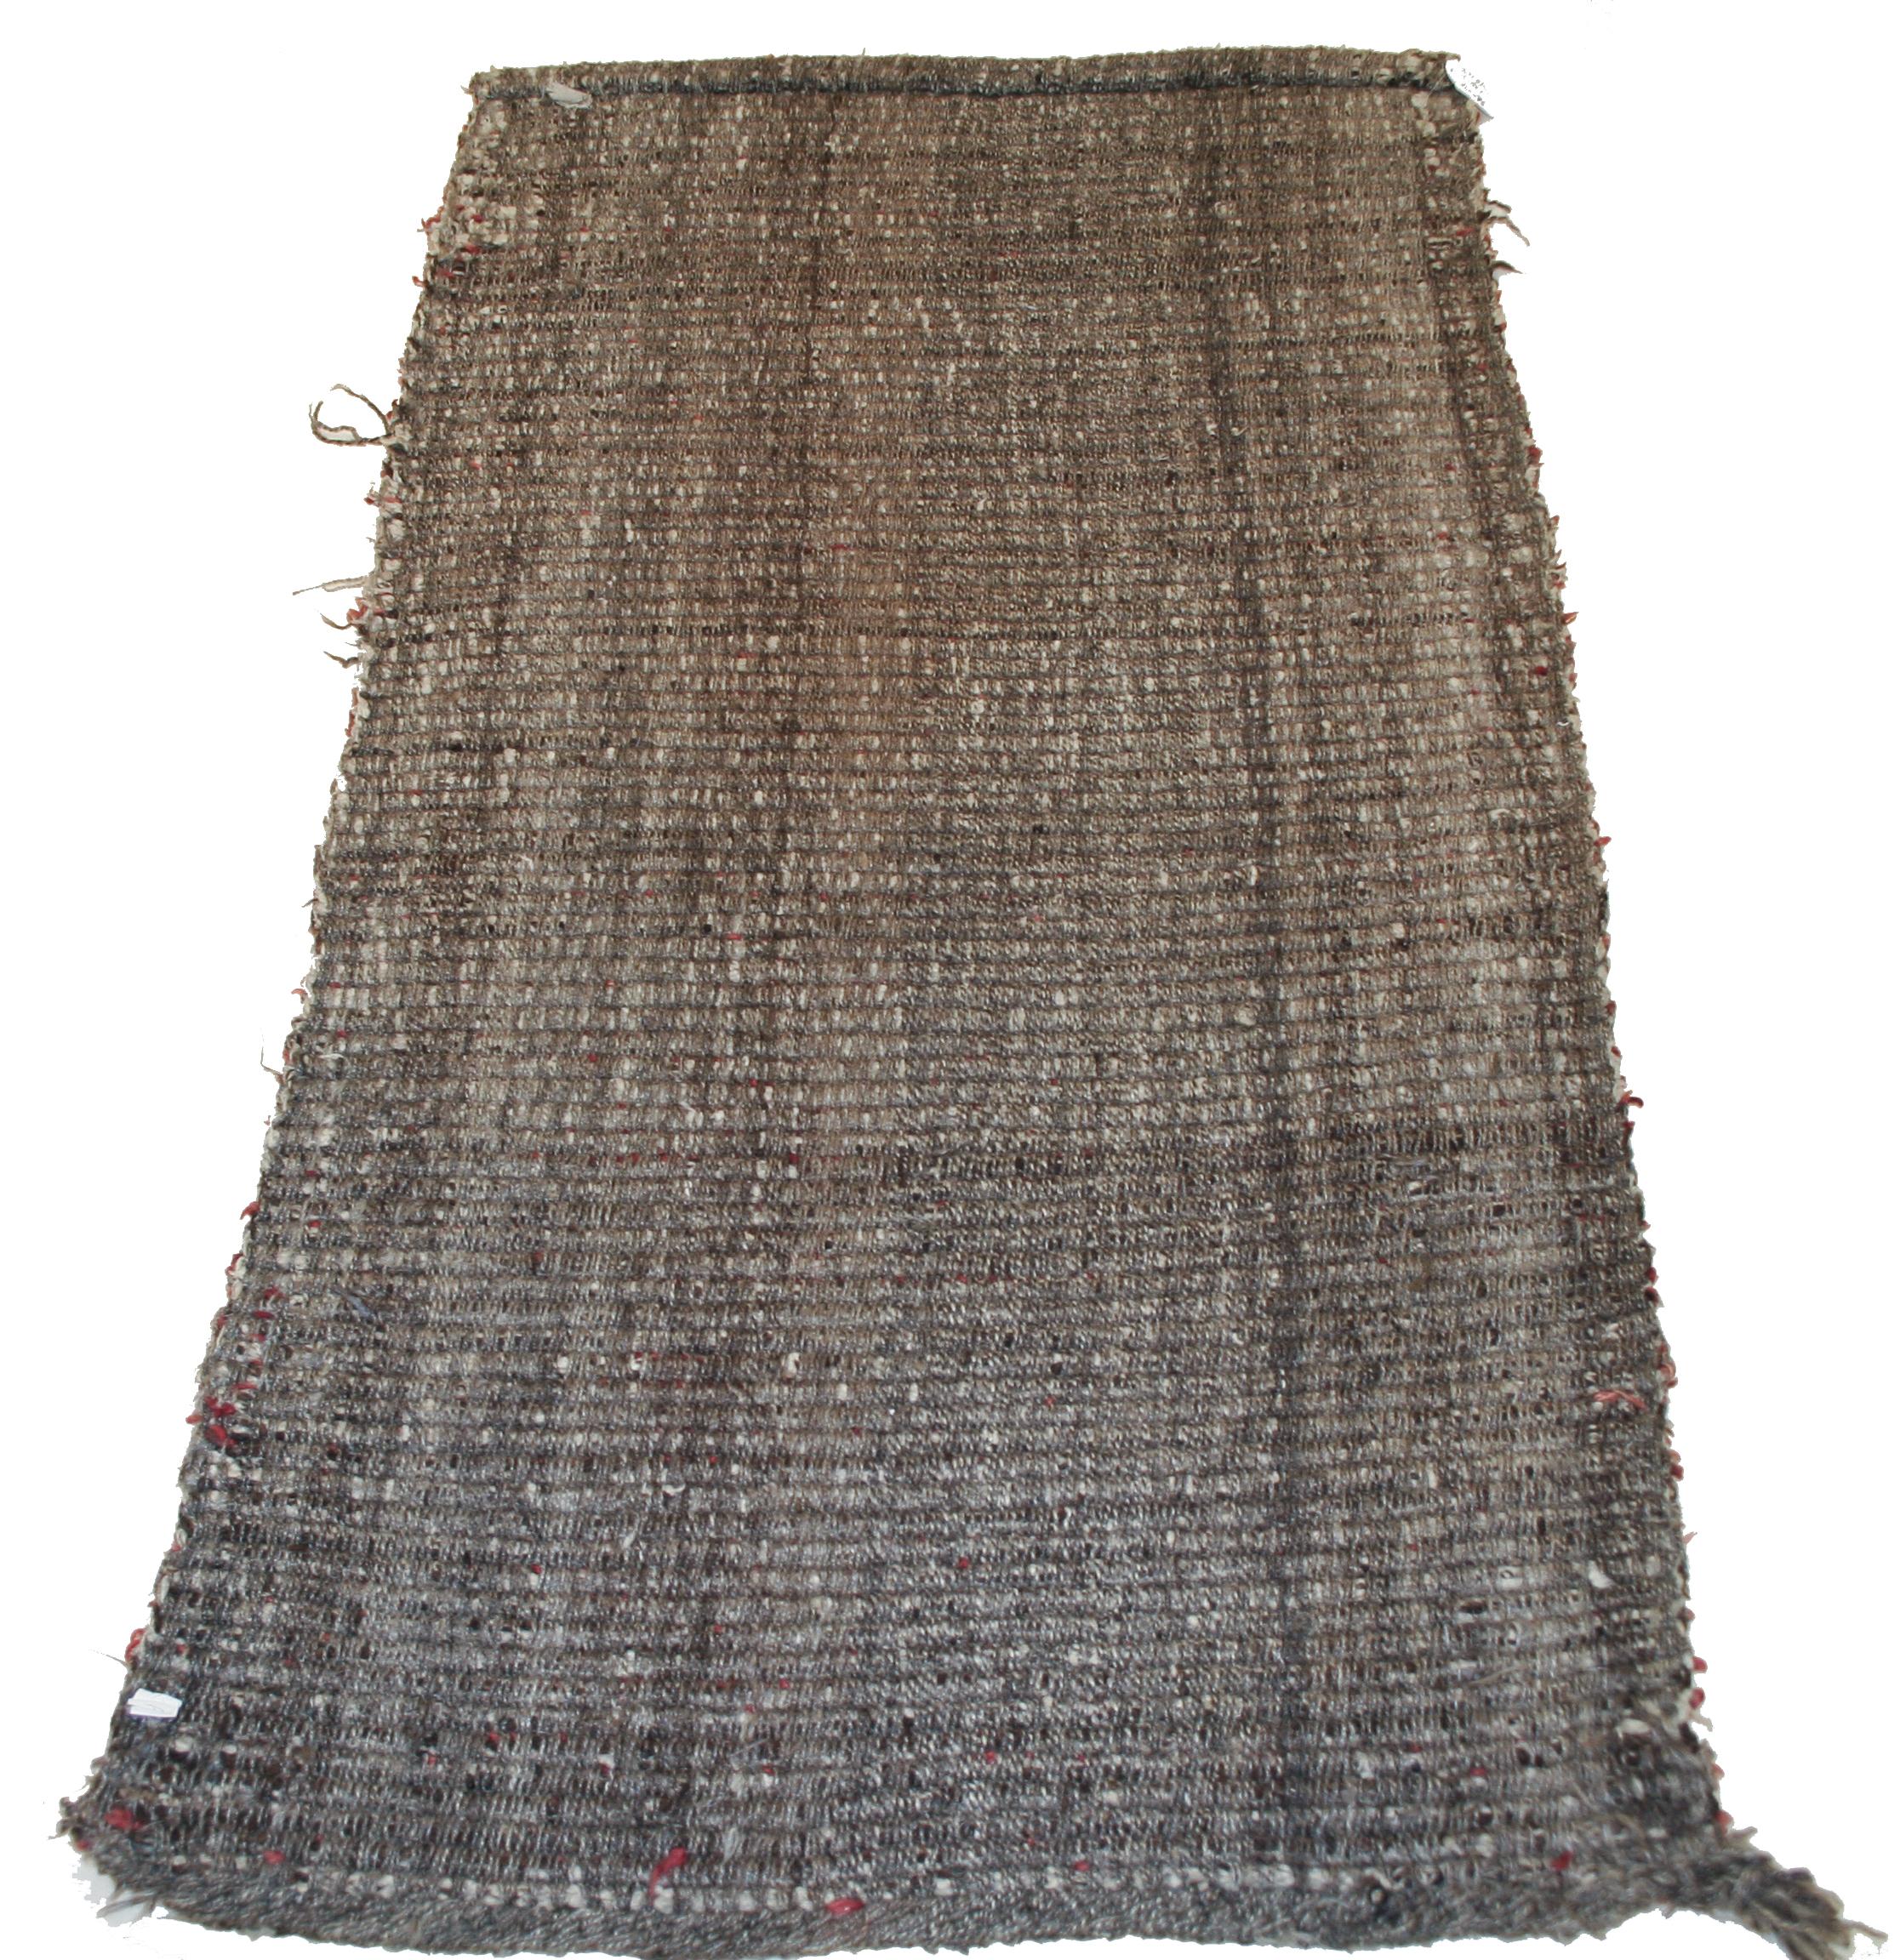 A fairly unique example of monochrome Wangden rug, the latter being distinguished by the characteristic warp-face back. Typical for the group is the use of lanolin-rich wool which imparts a special sparkle to the red.
This piece is featured in our